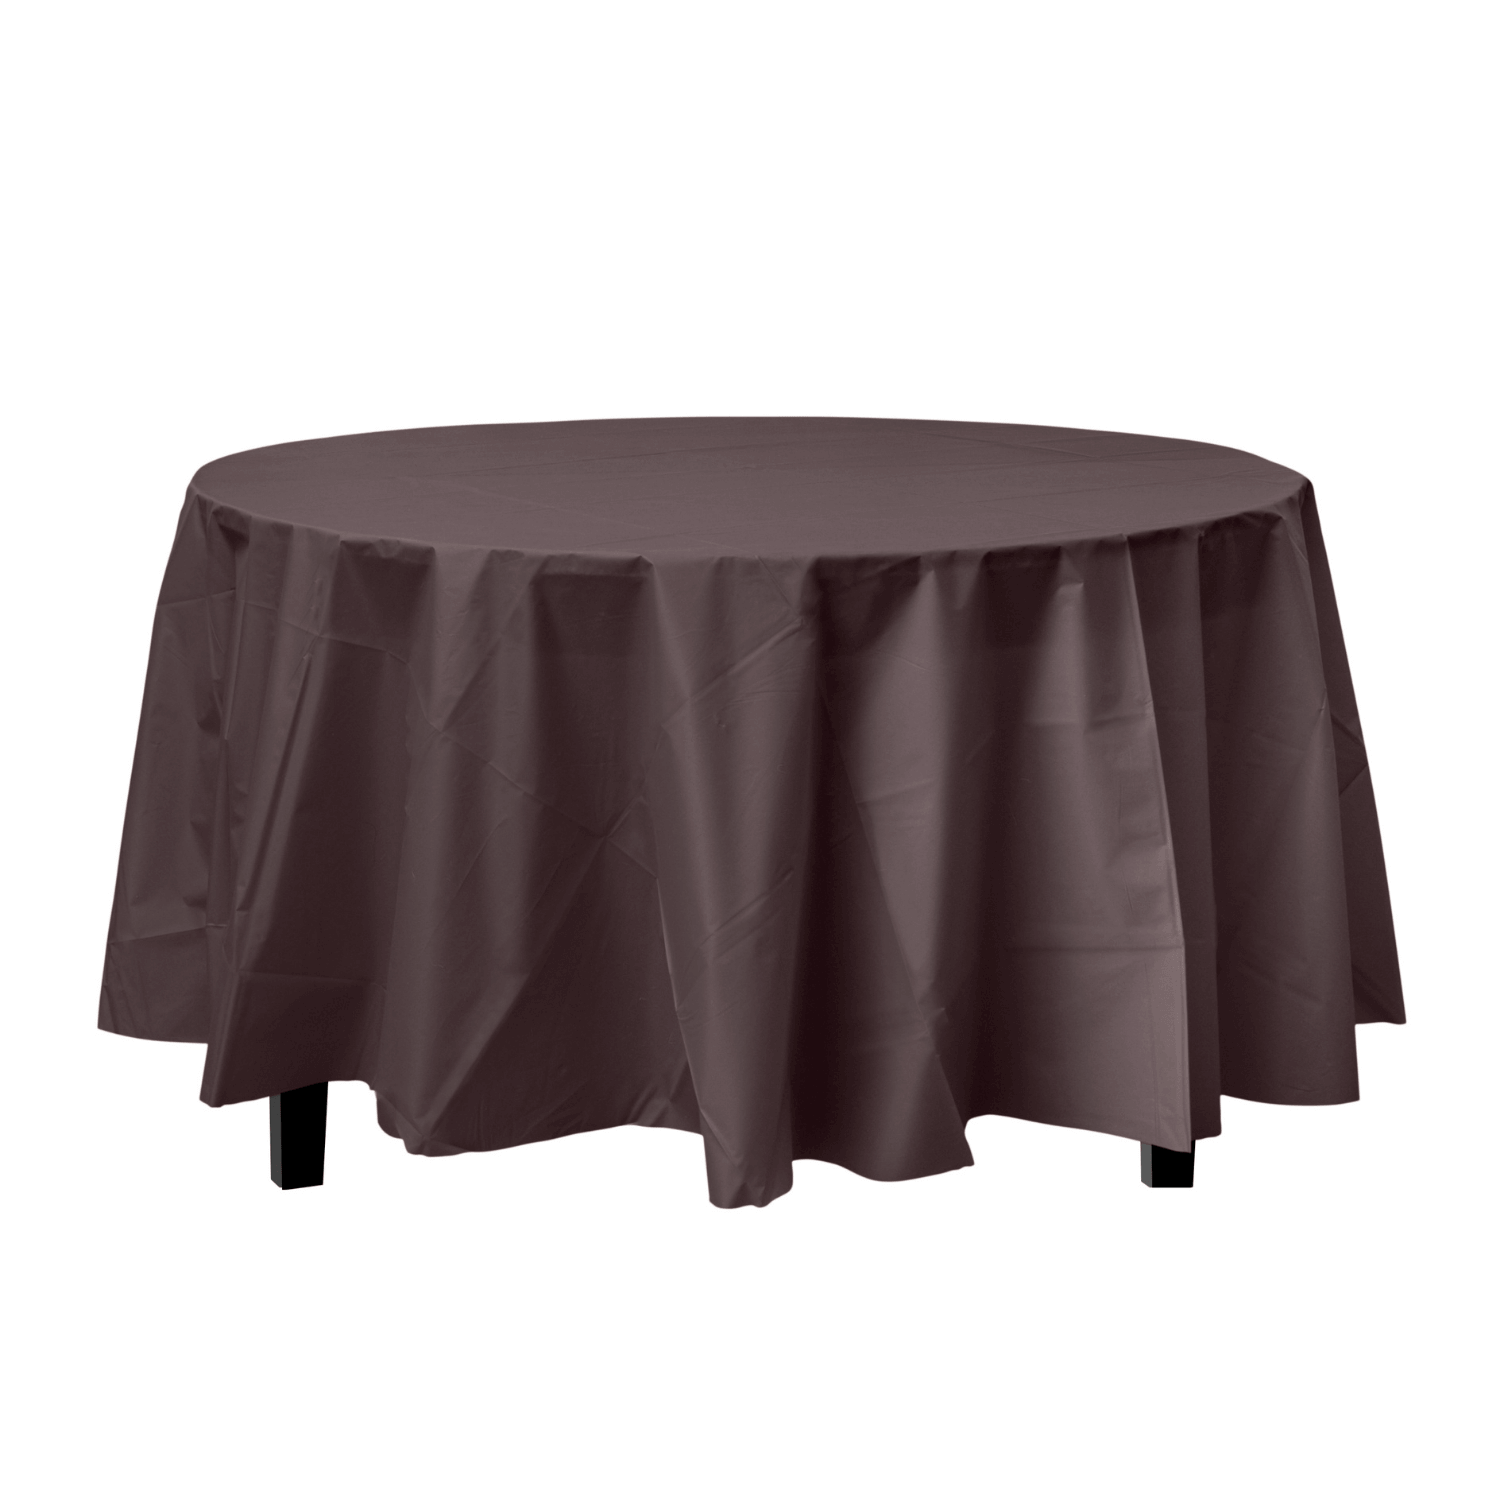 Brown Round Plastic Tablecloth | 48 Count - Yom Tov Settings